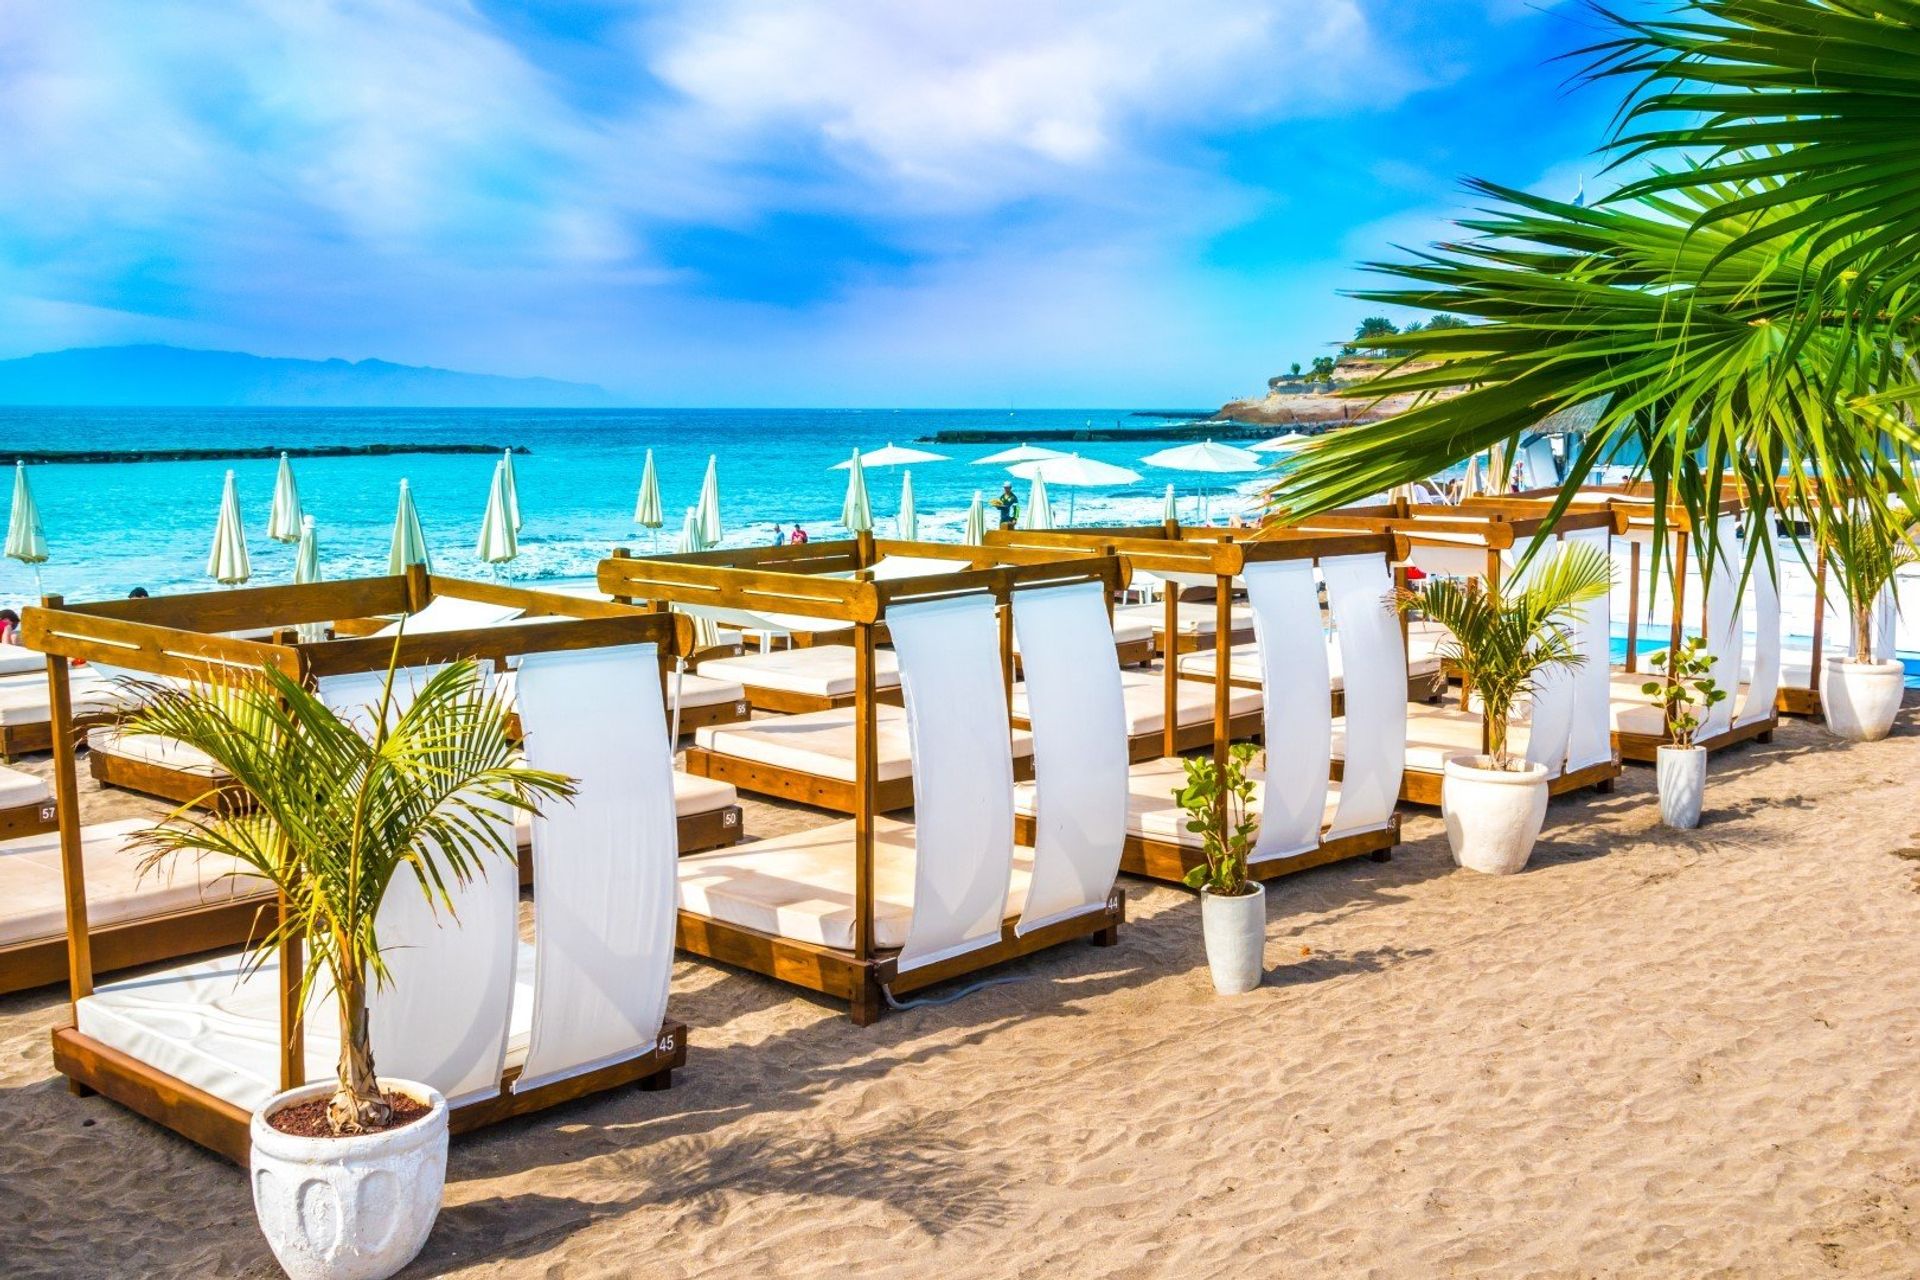 White cabanas on Costa Adeje beach with its turquoise waters and golden sand on the south coast of Tenerife